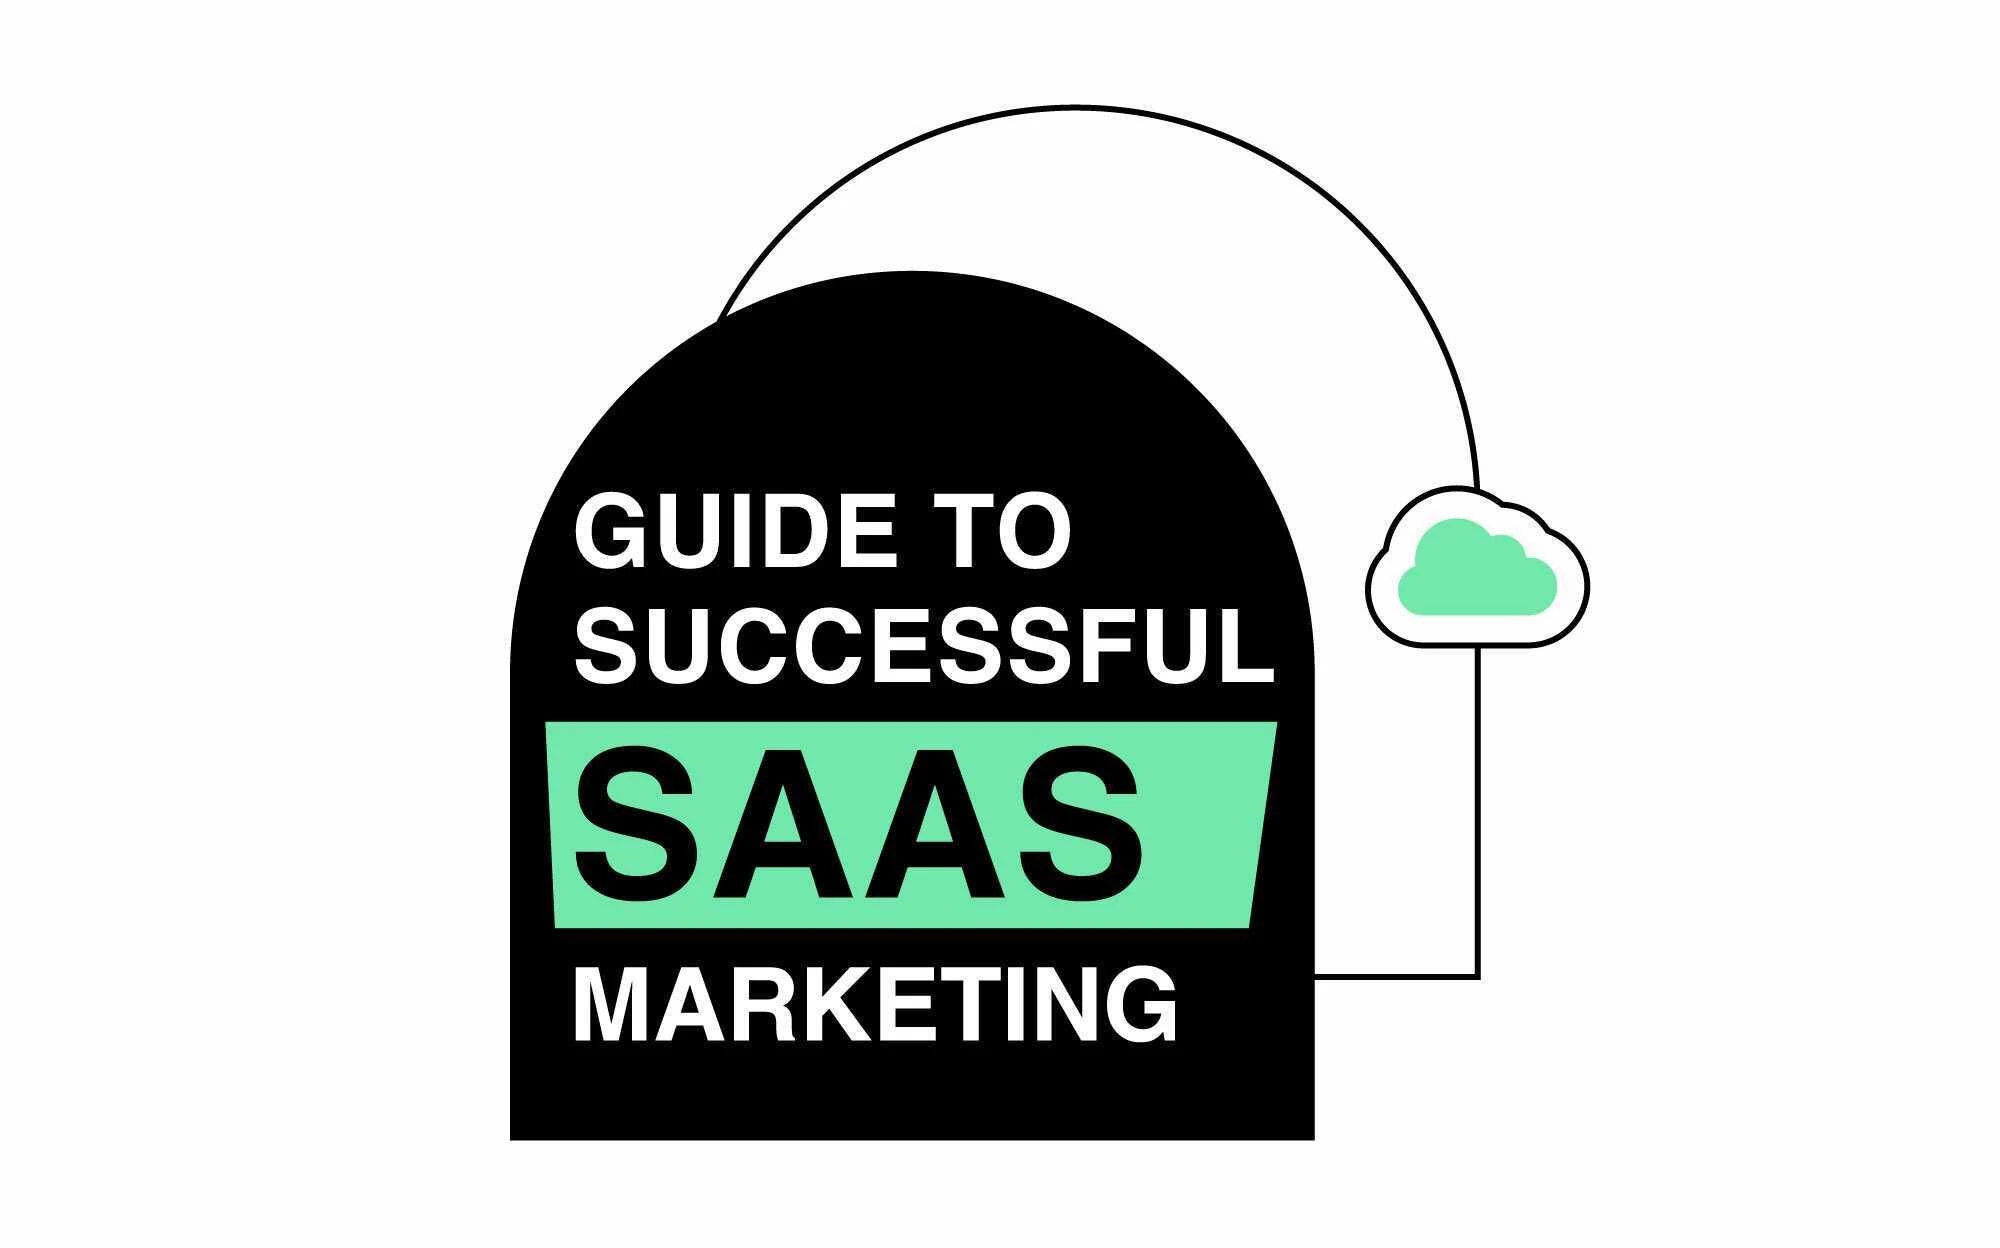 The Complete Guide to Successful SaaS Marketing